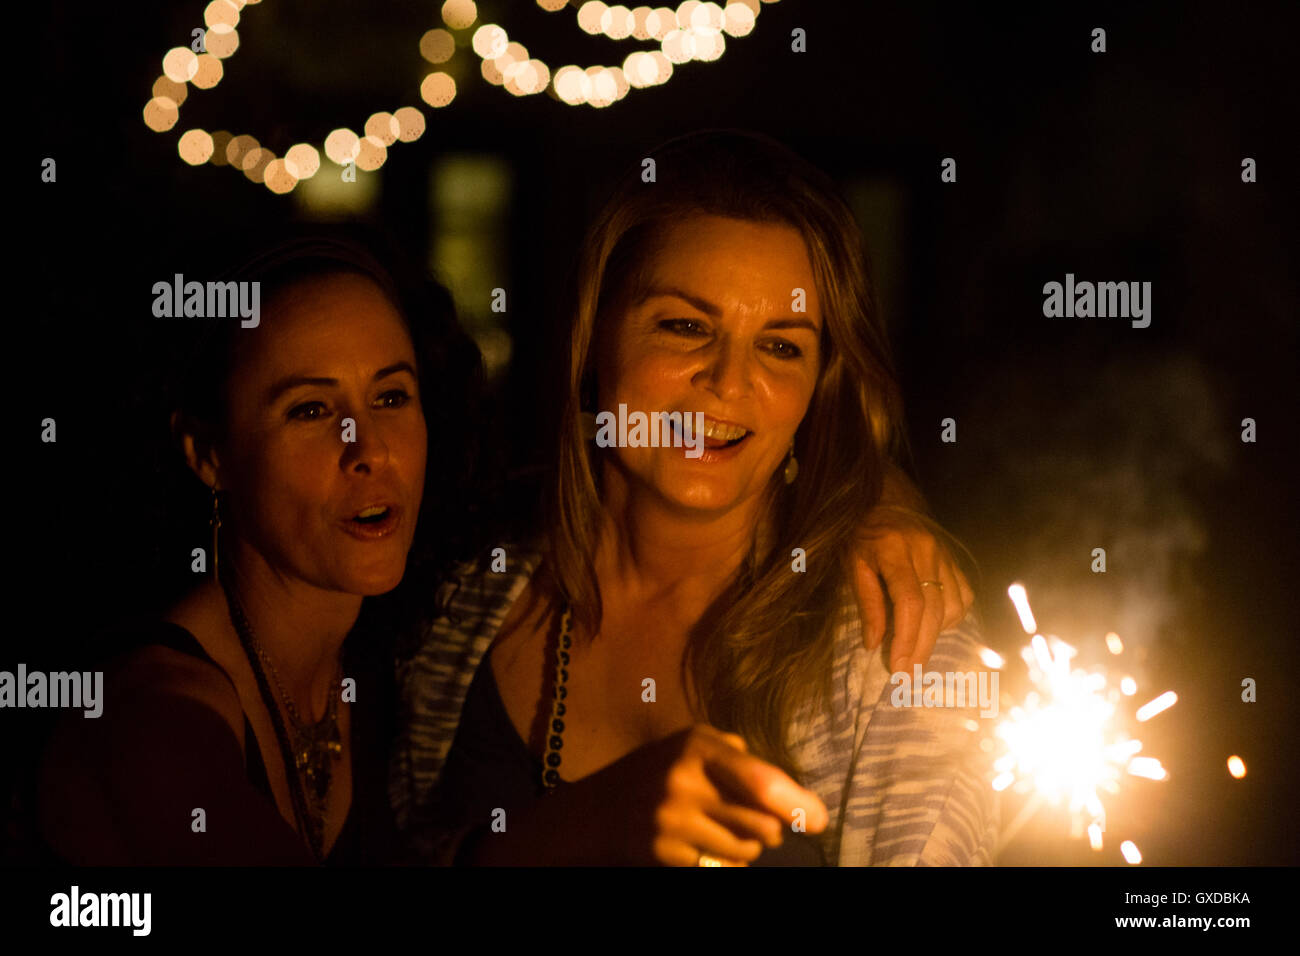 Mature female friends playing with sparkler in garden at night Stock Photo